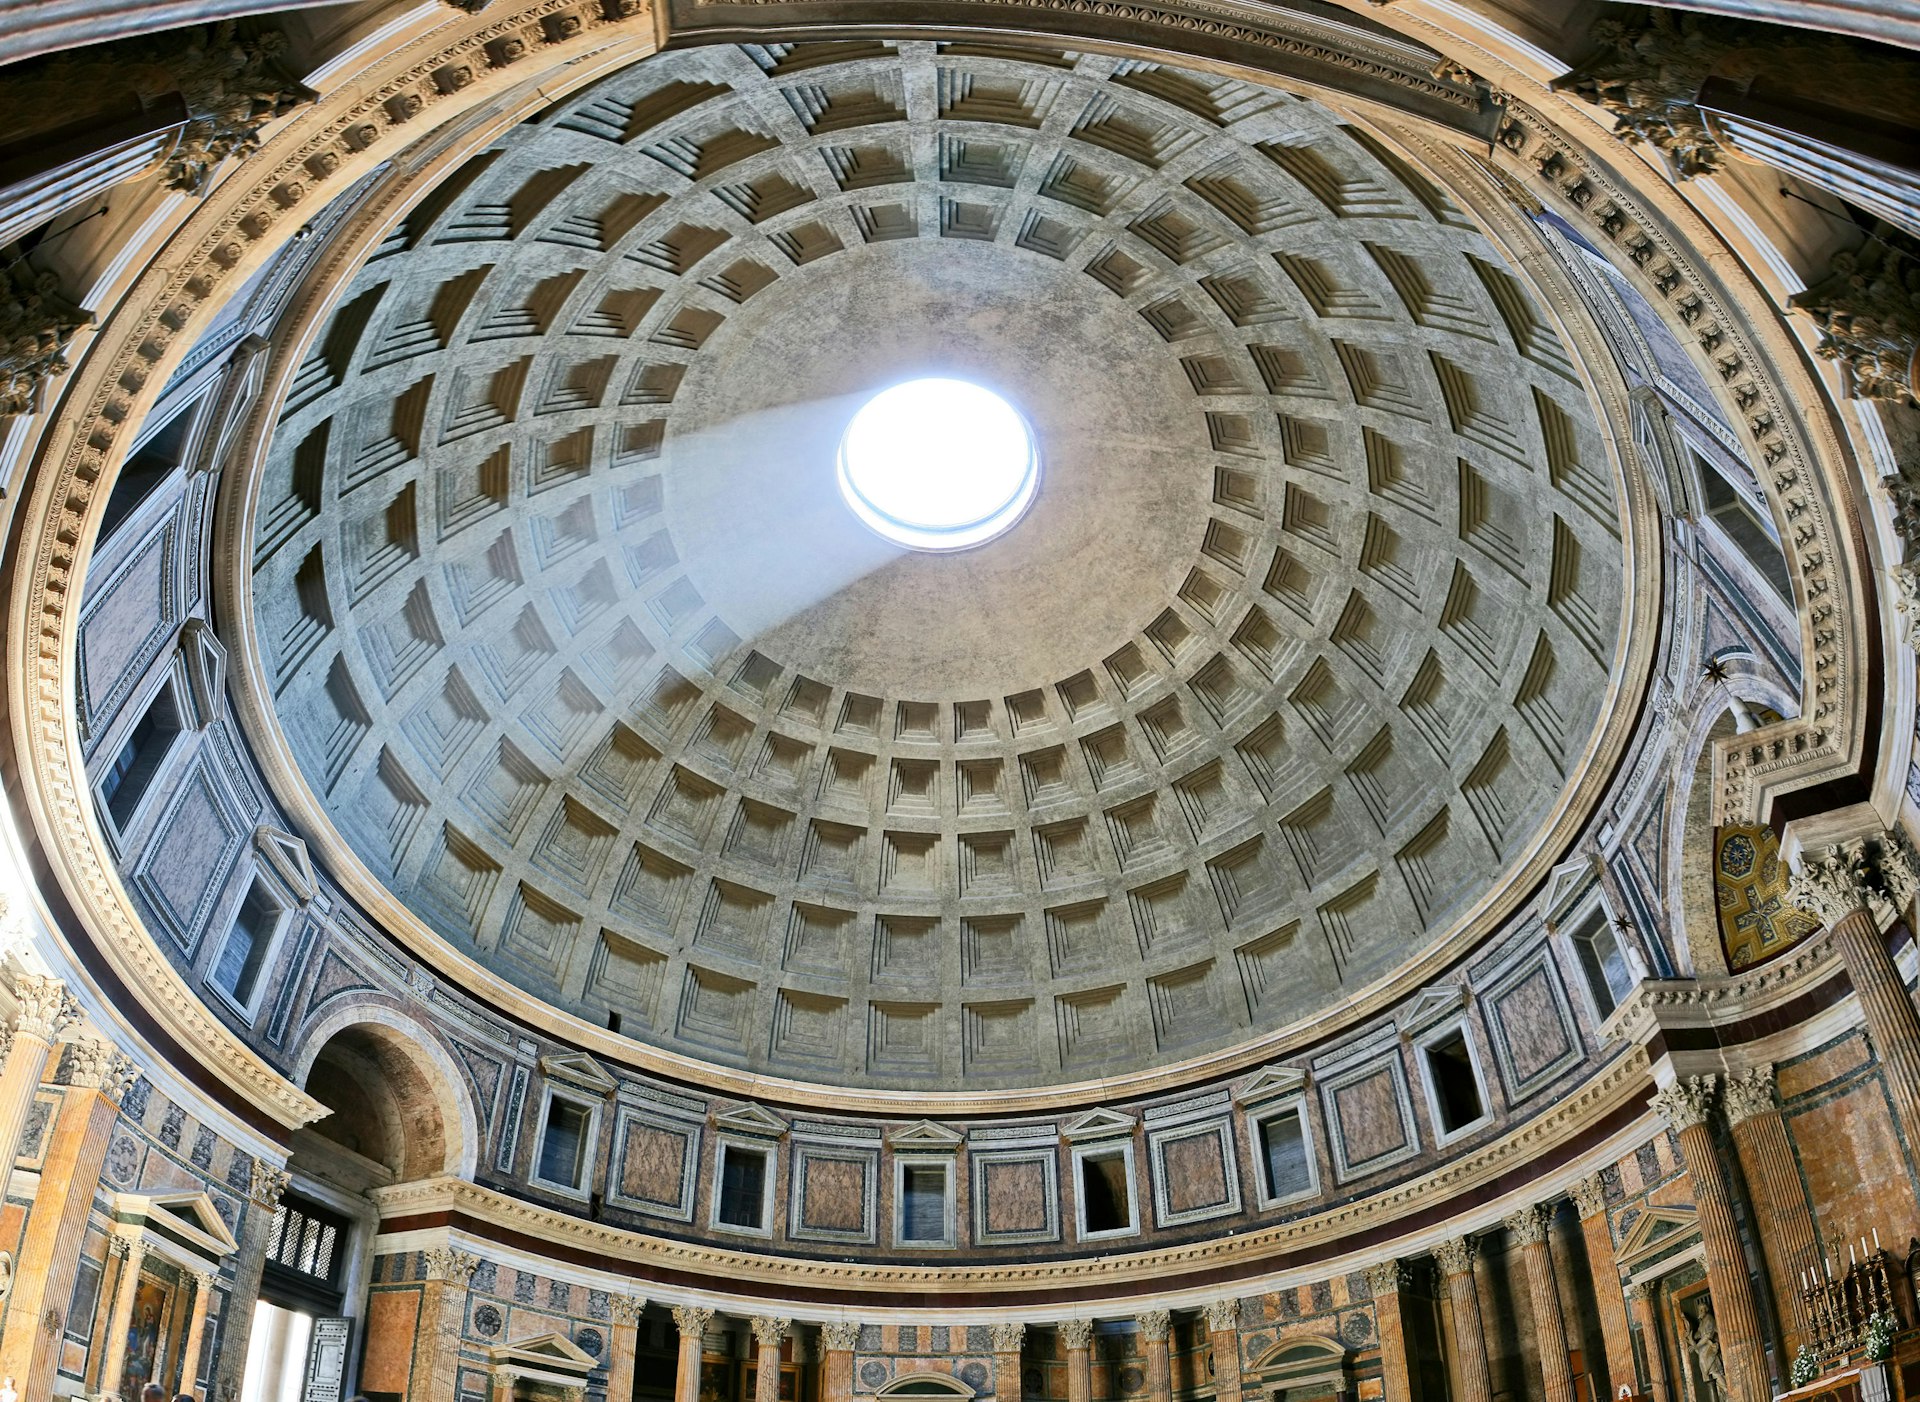 A beam of light shines through the oculus of the dome at the Pantheon, in Rome